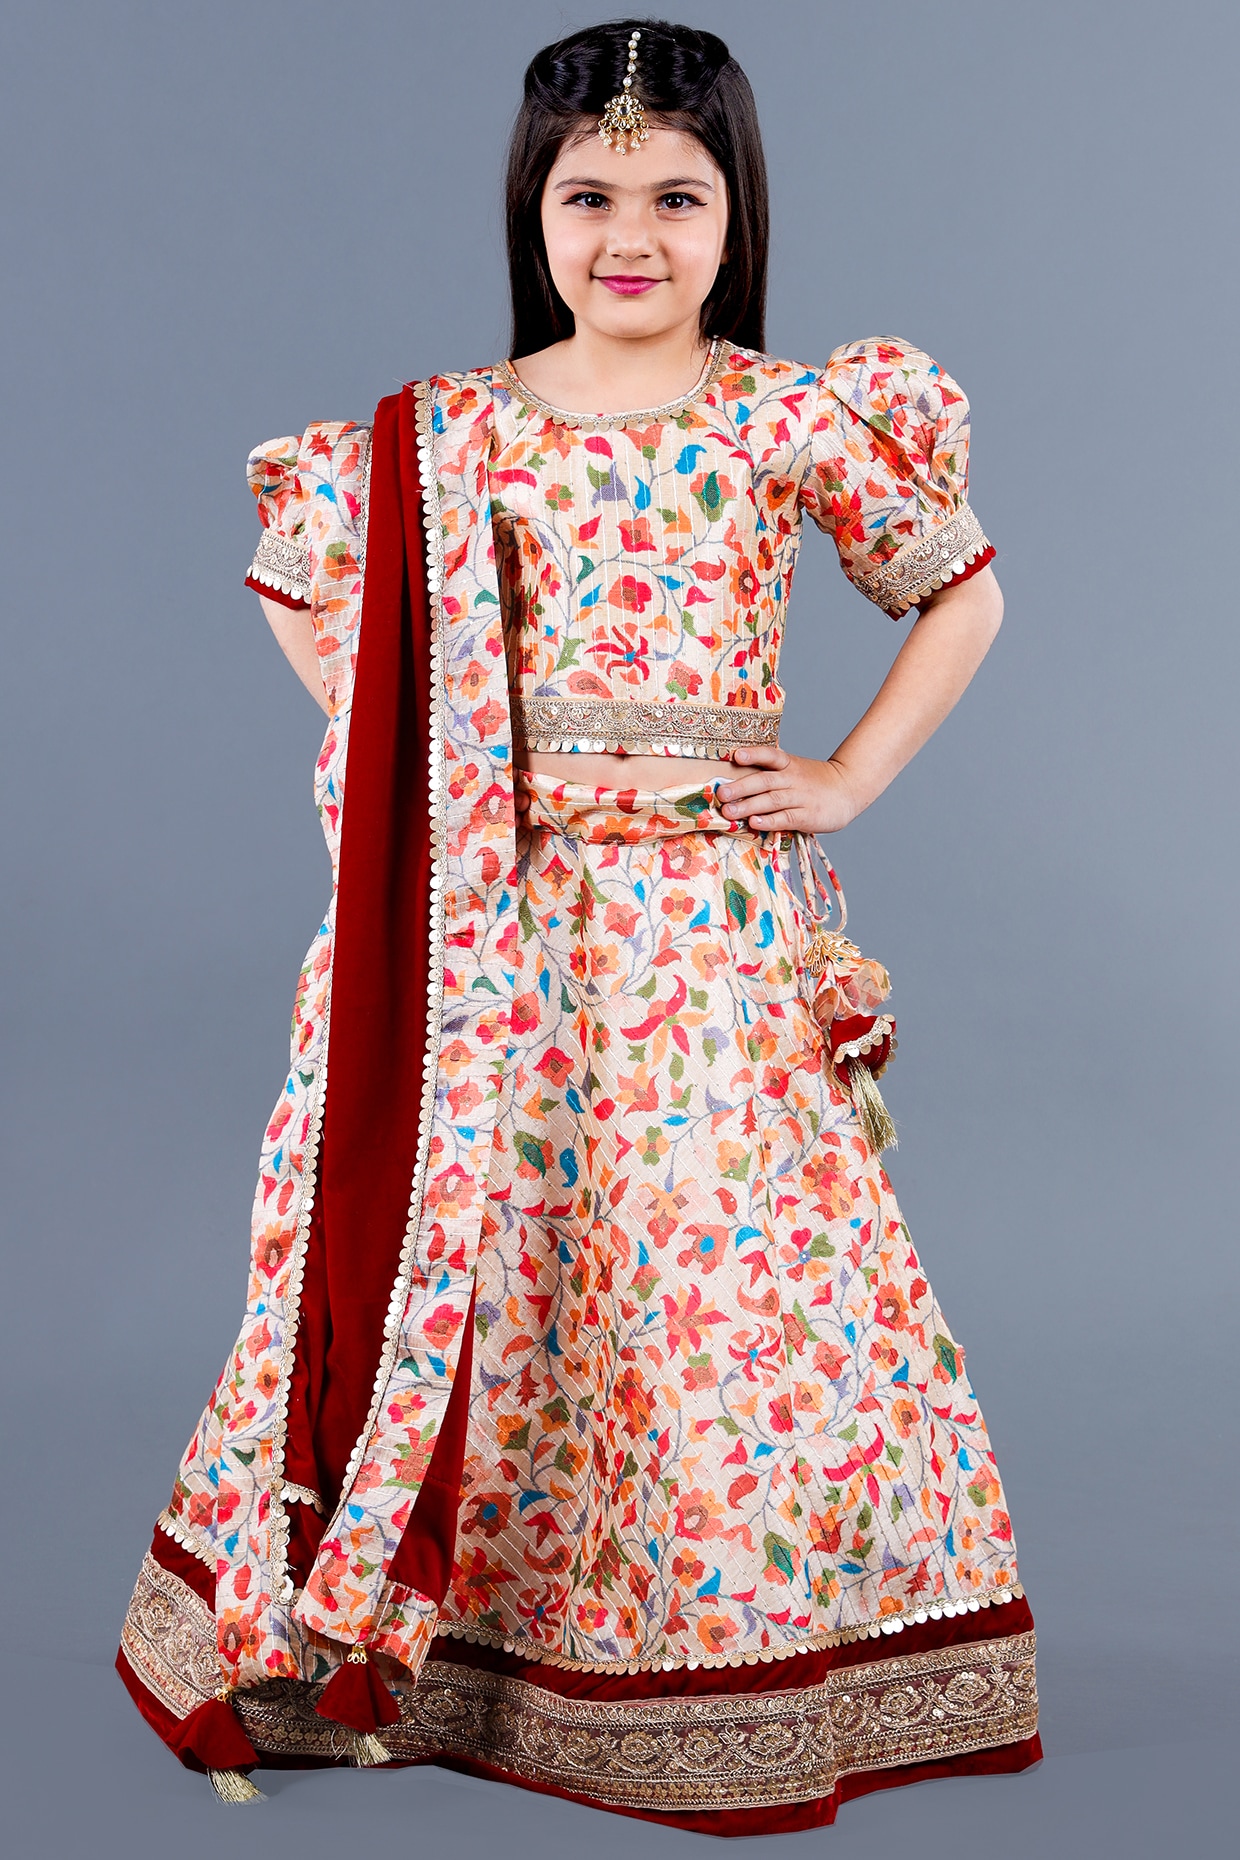 Sari with 3/4 length-sleeve blouse. Love the proportions. | Indian fashion,  Fashion, Indian outfits